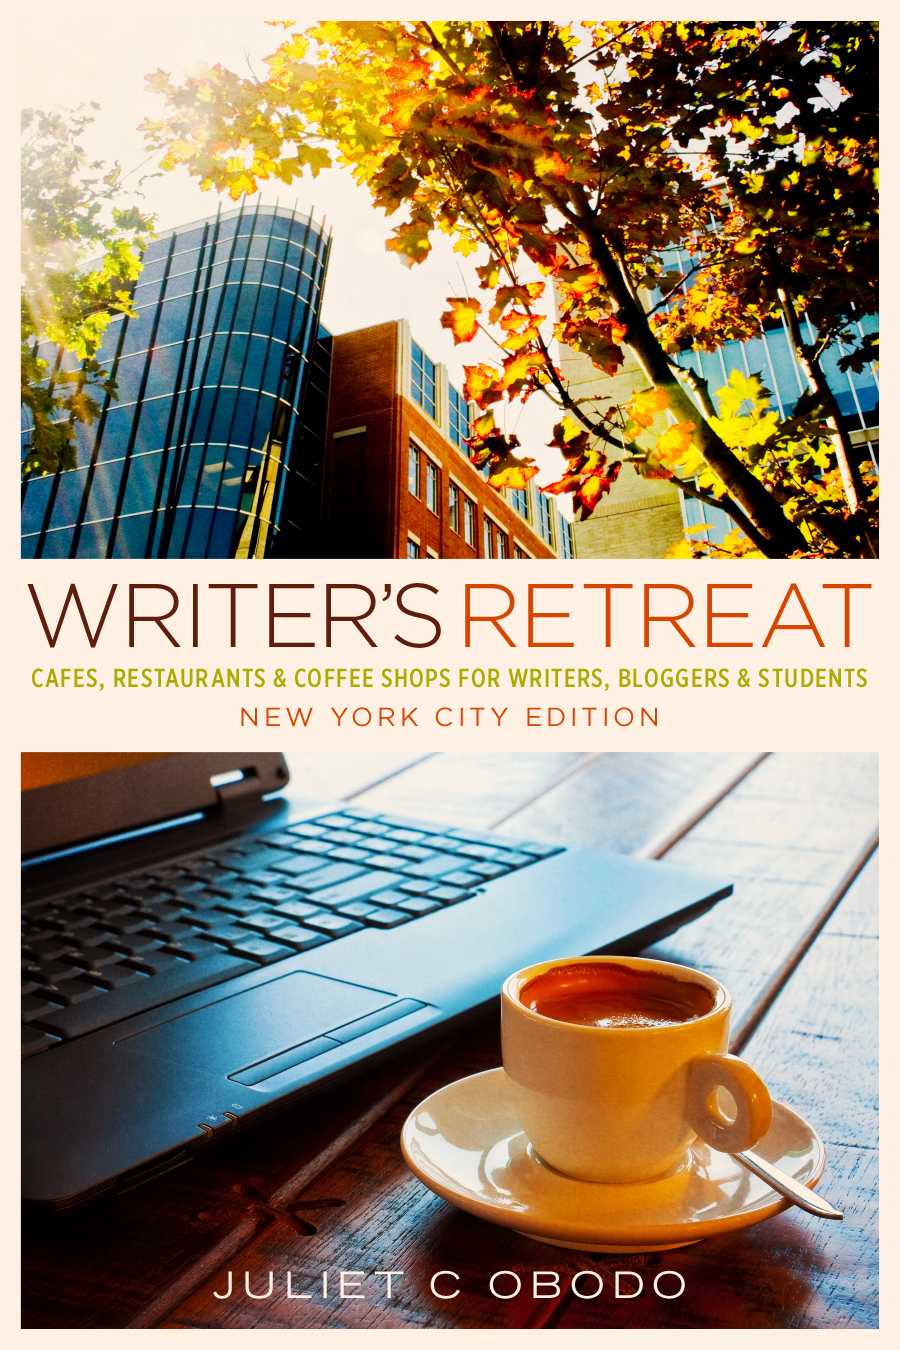 Writer's Retreat New York-Best Cafes for Writers,Bloggers & Students